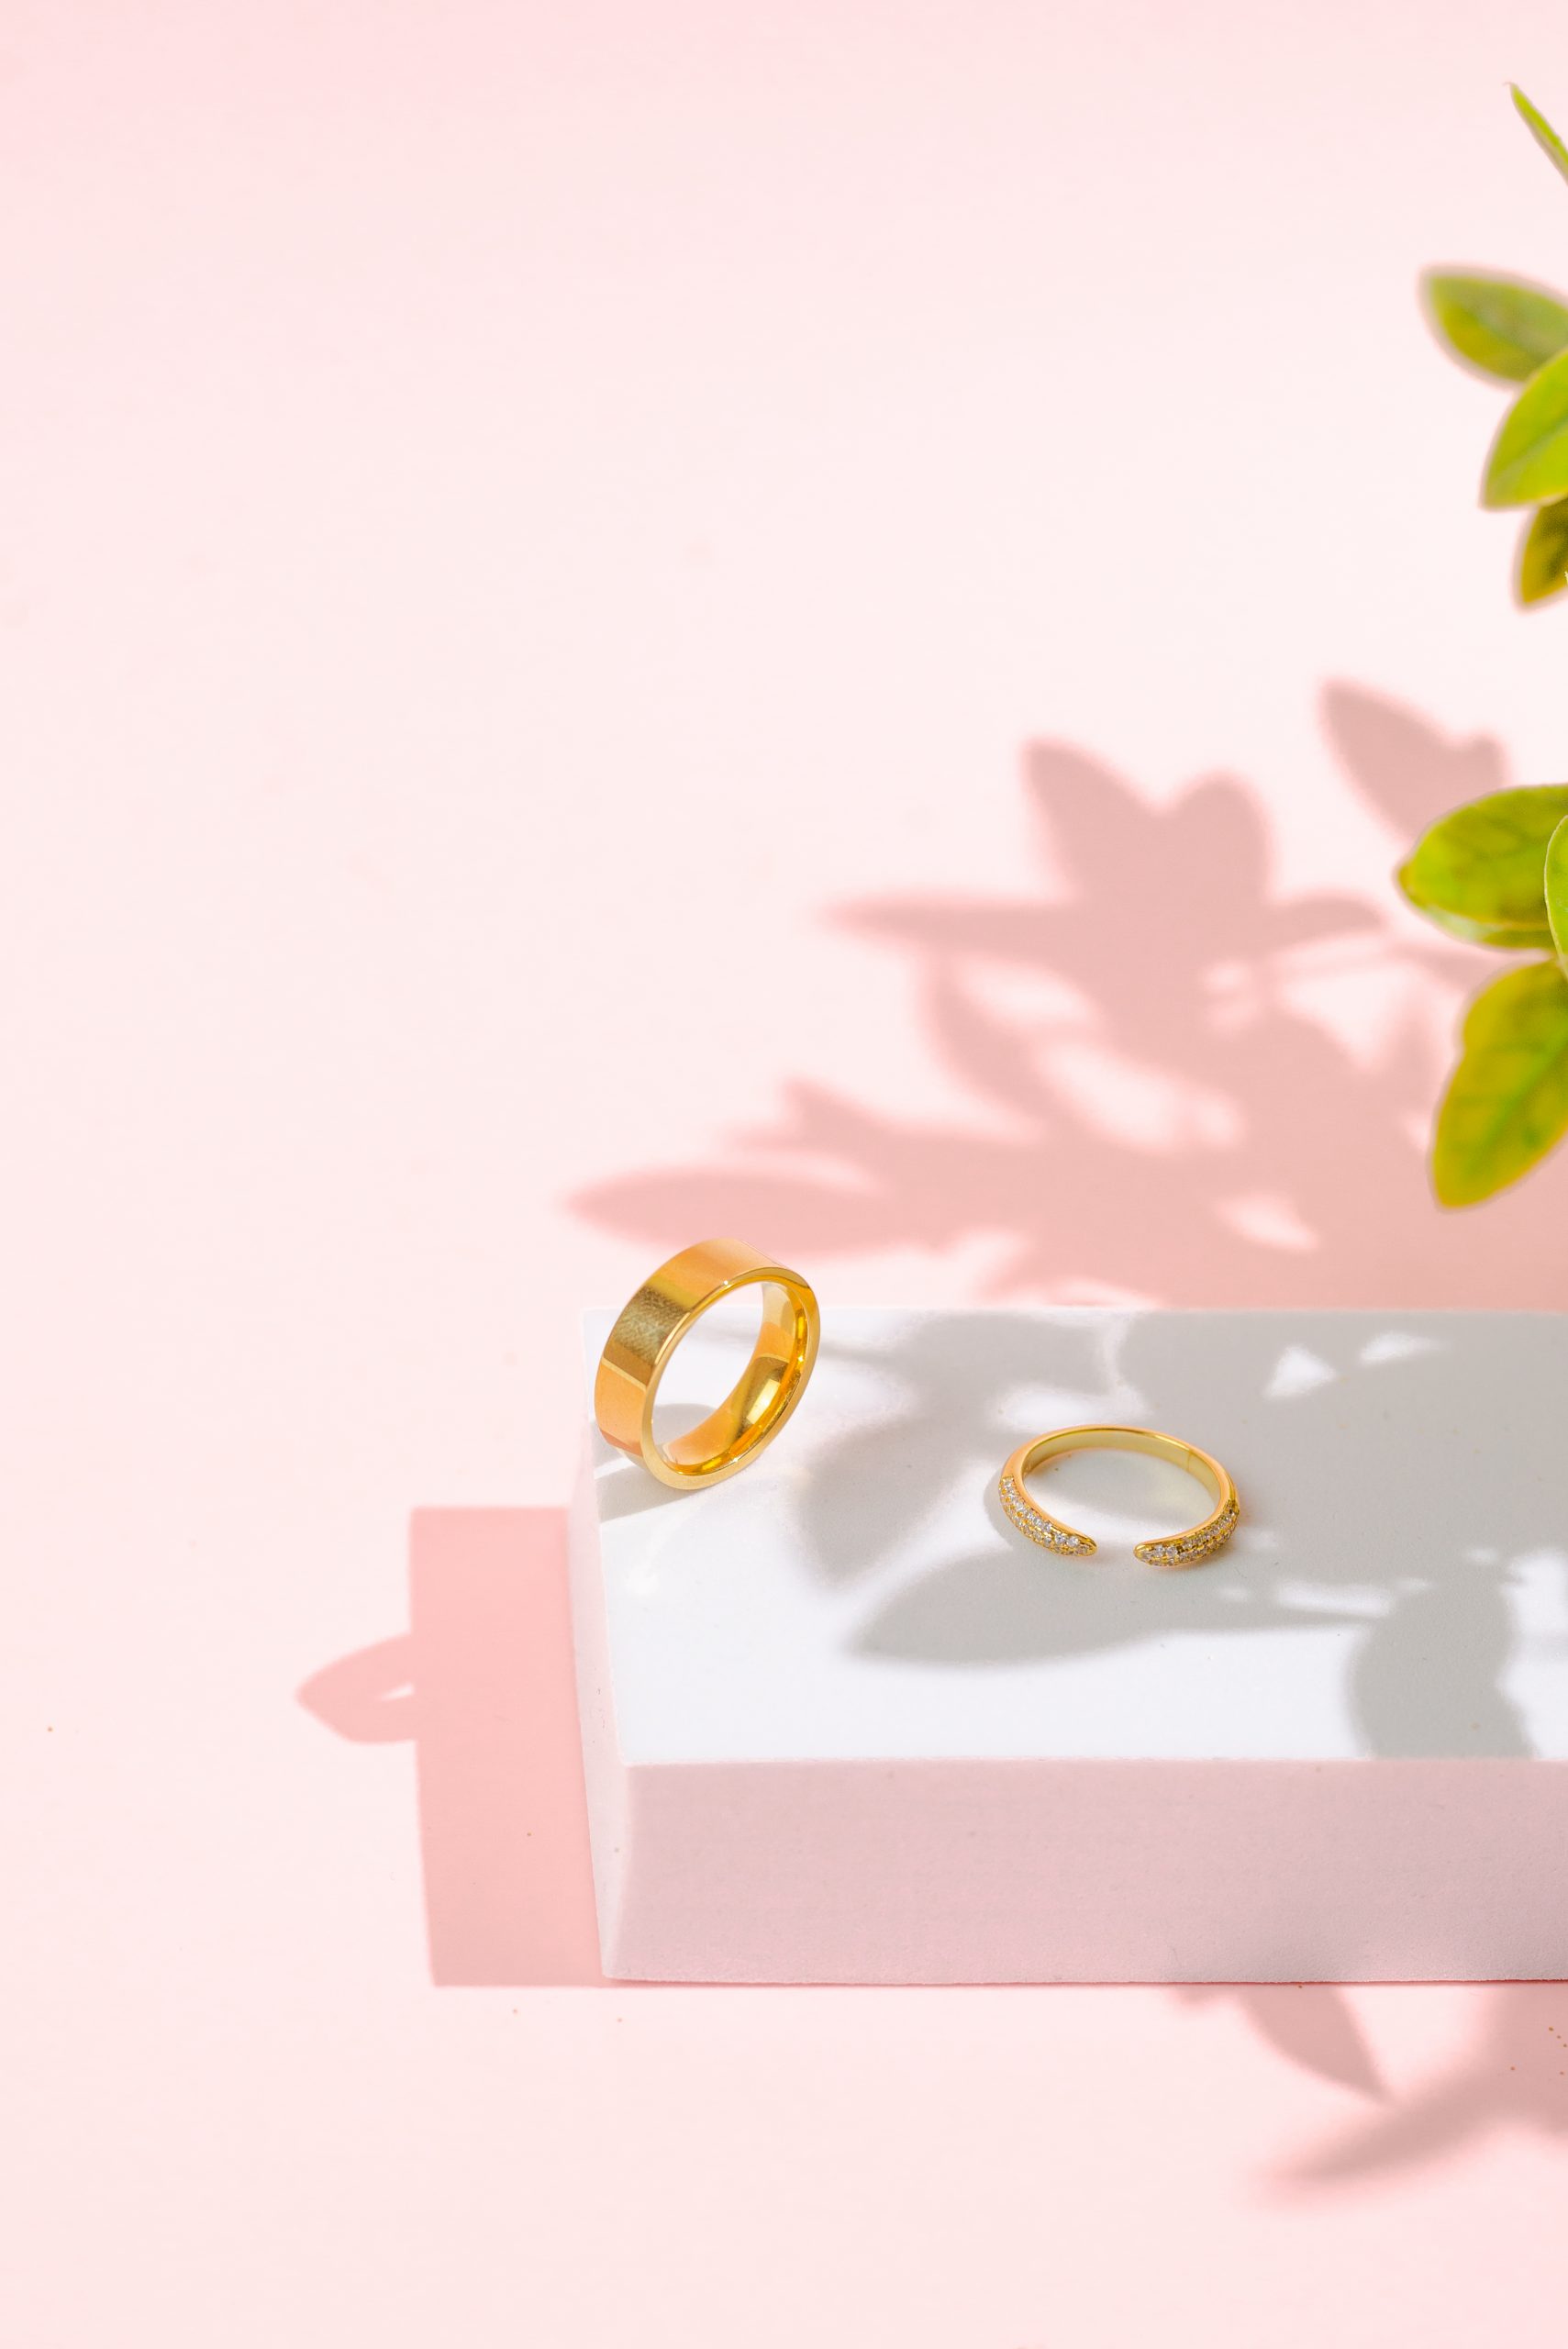 still like jewelery product photography services by danielle deangelis. gold rings photographed on a pink background with a white riser